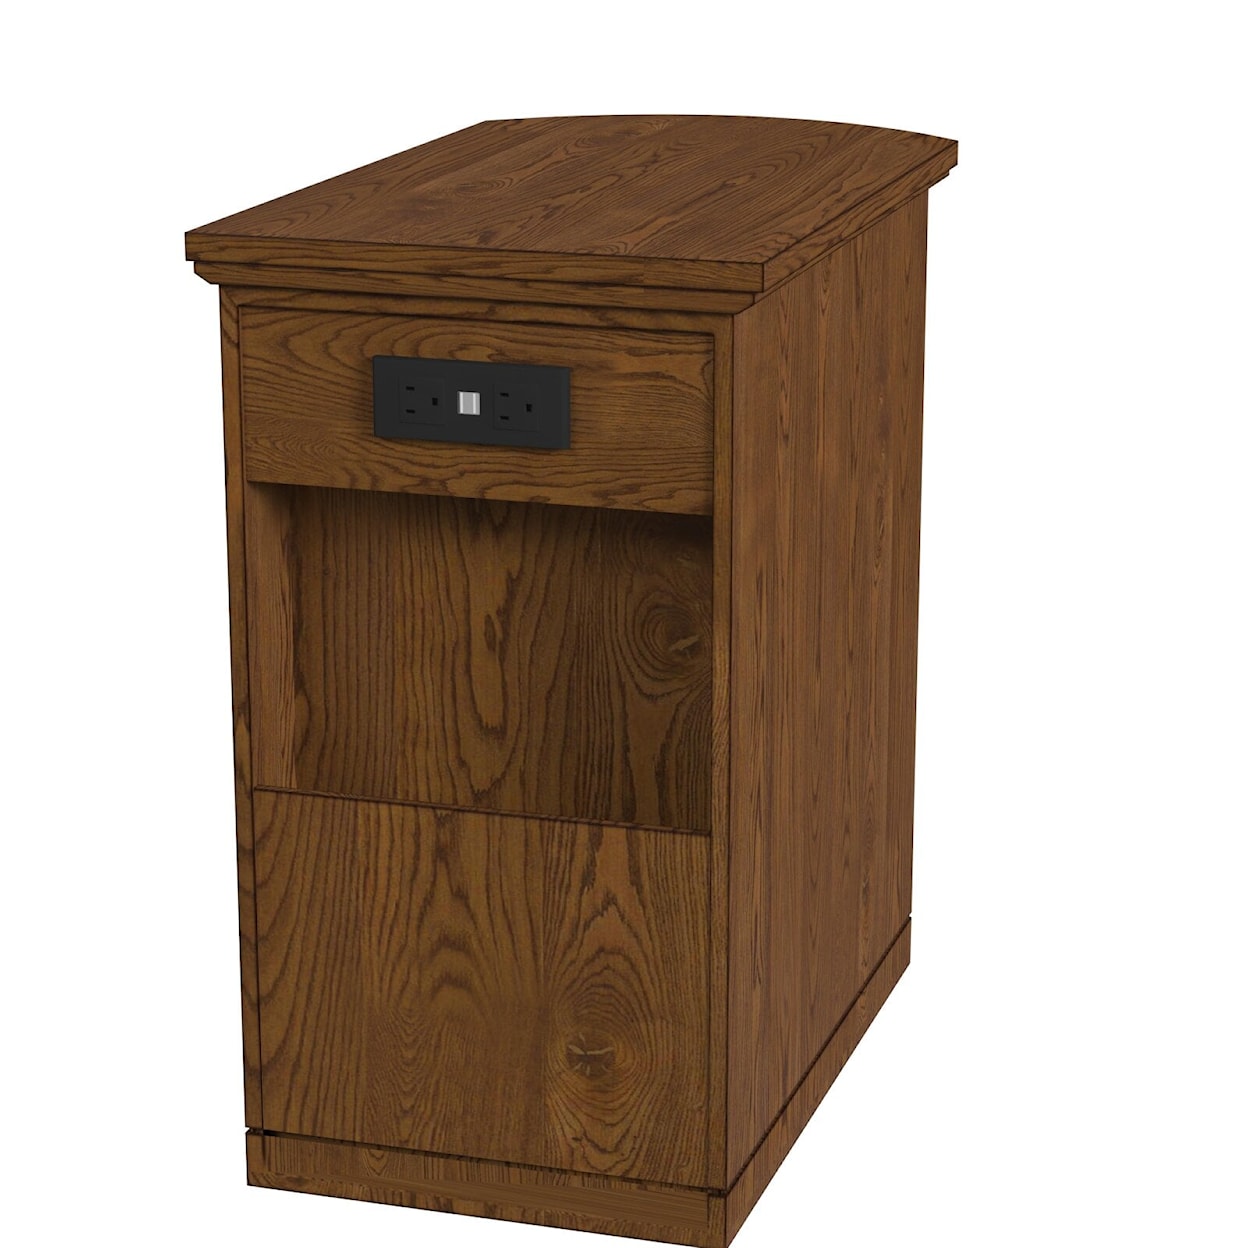 Null Furniture 2016 - Newport Chairside Cabinet